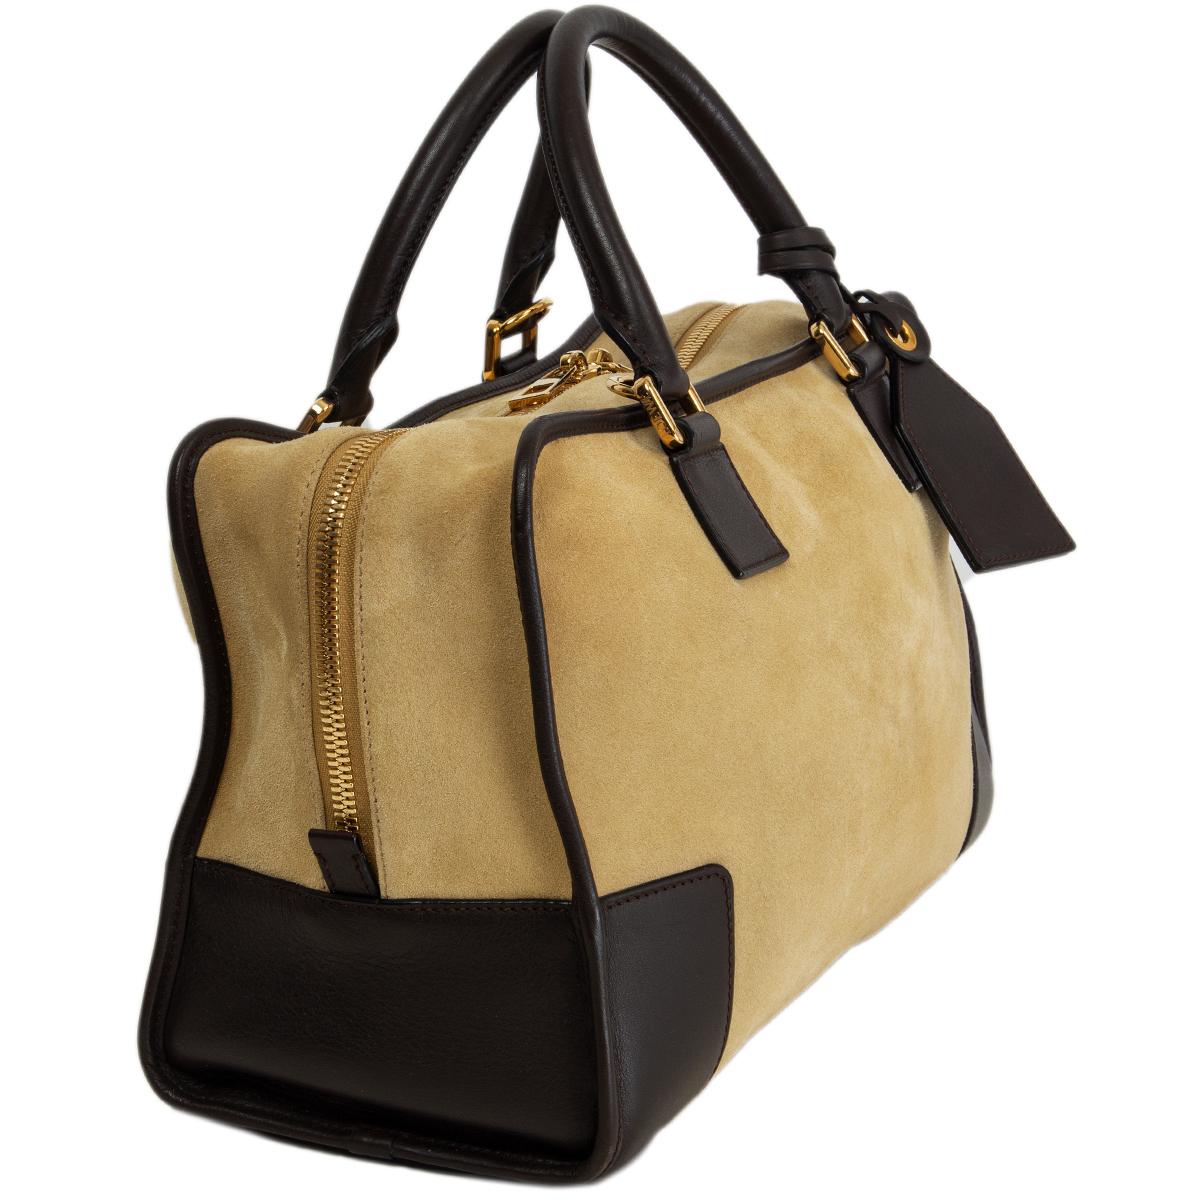 100% authentic Loewe Amazona 36 shoulder bag in beige suede and espresso brown calfskin trimming and handles featuring gold-tone hardware. Open with a zipper on top and is lined in beige and dark brown calfskin with one zip pocket against the back.